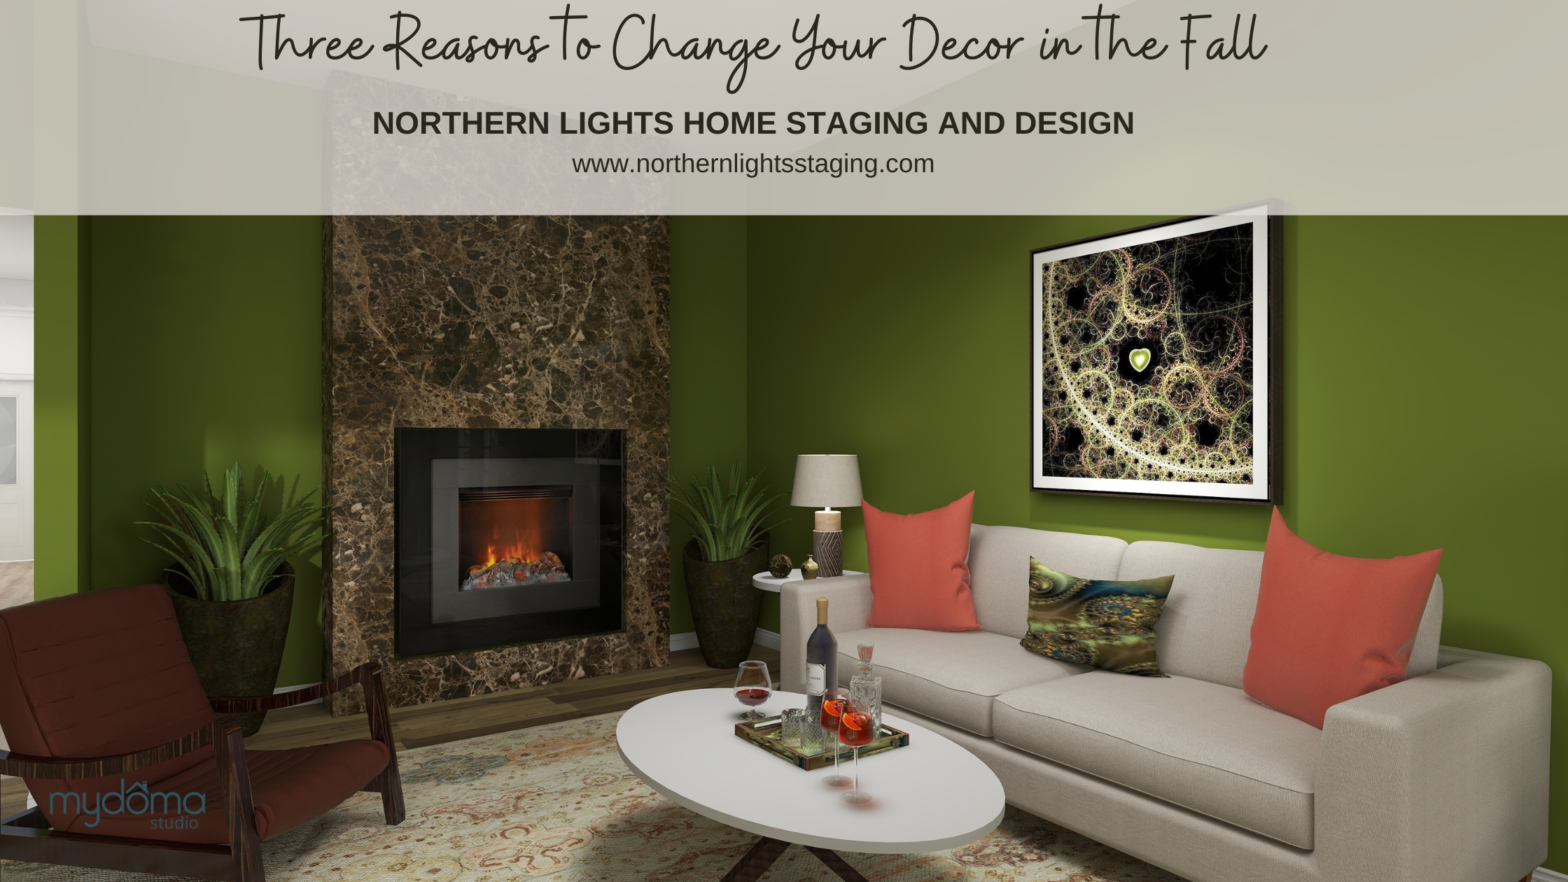 Three Reasons to Change Your Decor in the Fall